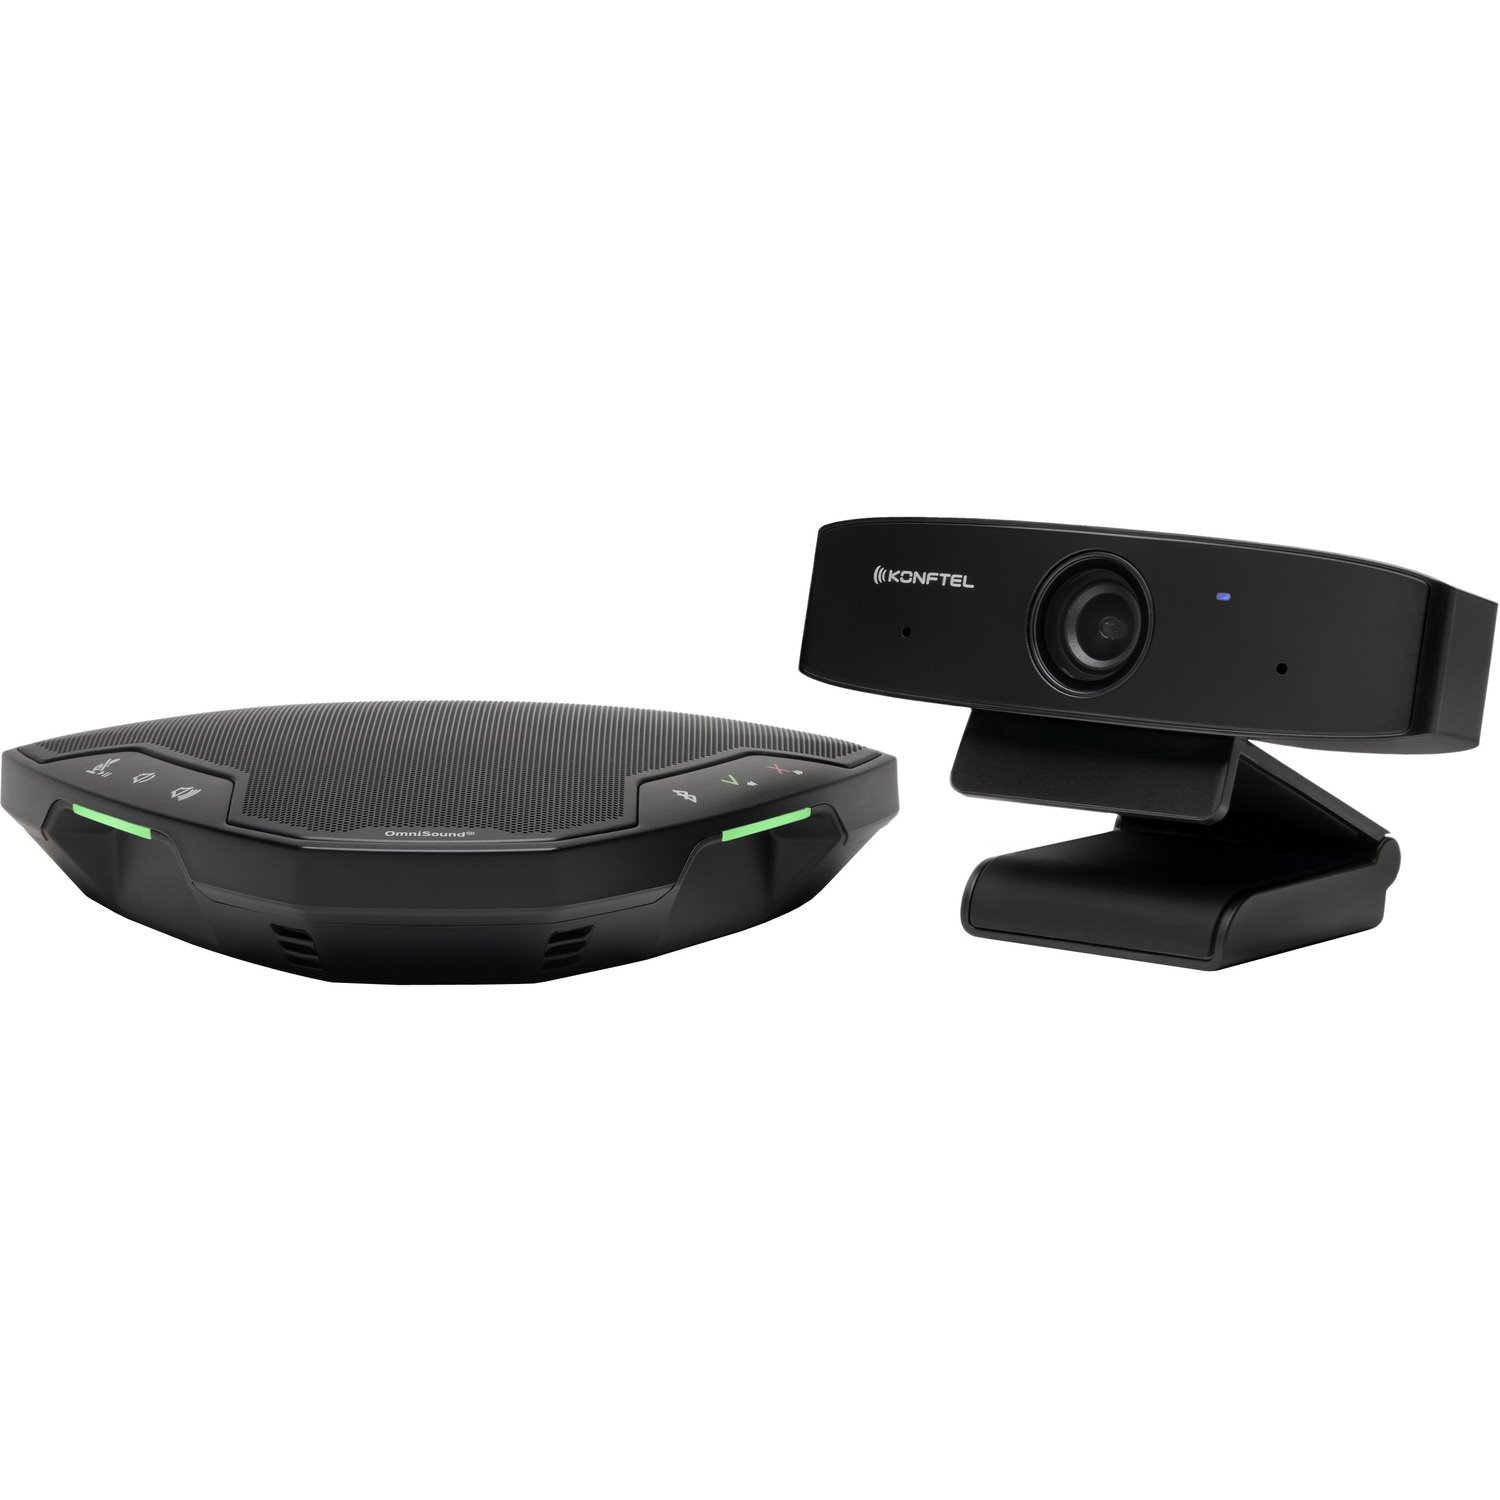 Konftel Personal Video Kit - Room type: Personal - Business webcam - Professional speakerphone - 1080p Full HD - OmniSound&reg; with HD audio - Small and portable